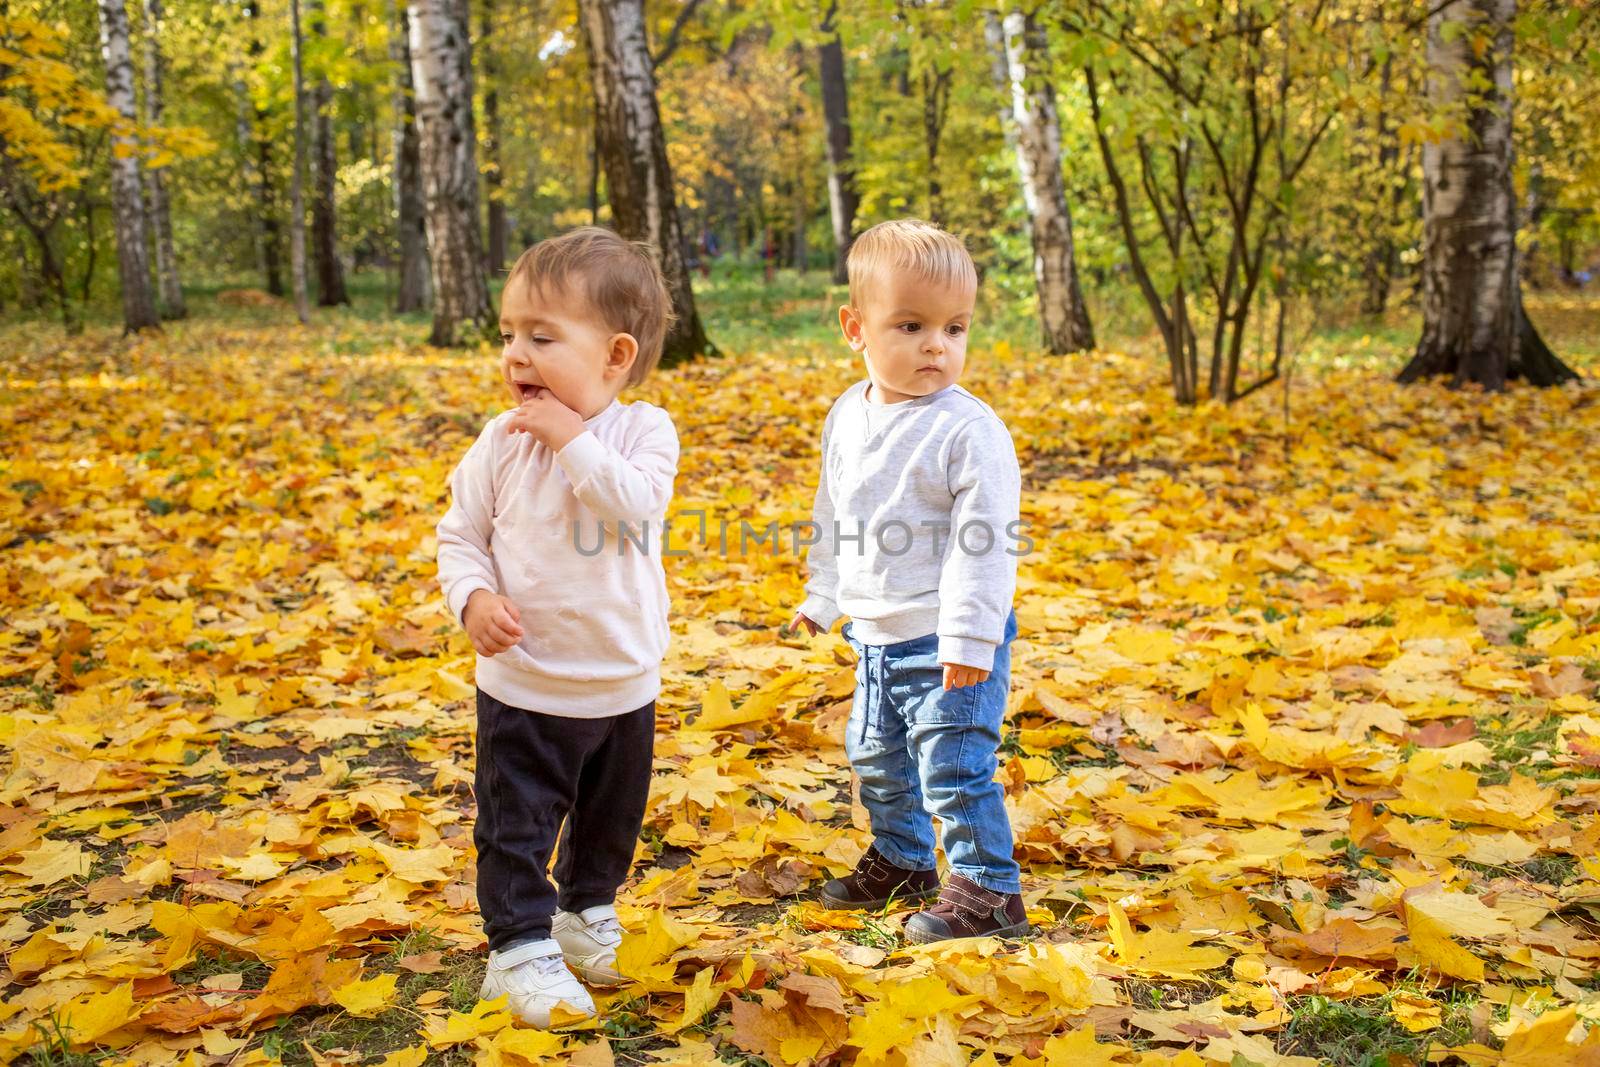 two adorable toddlers in an autumn park in yellow leaves by Mariaprovector